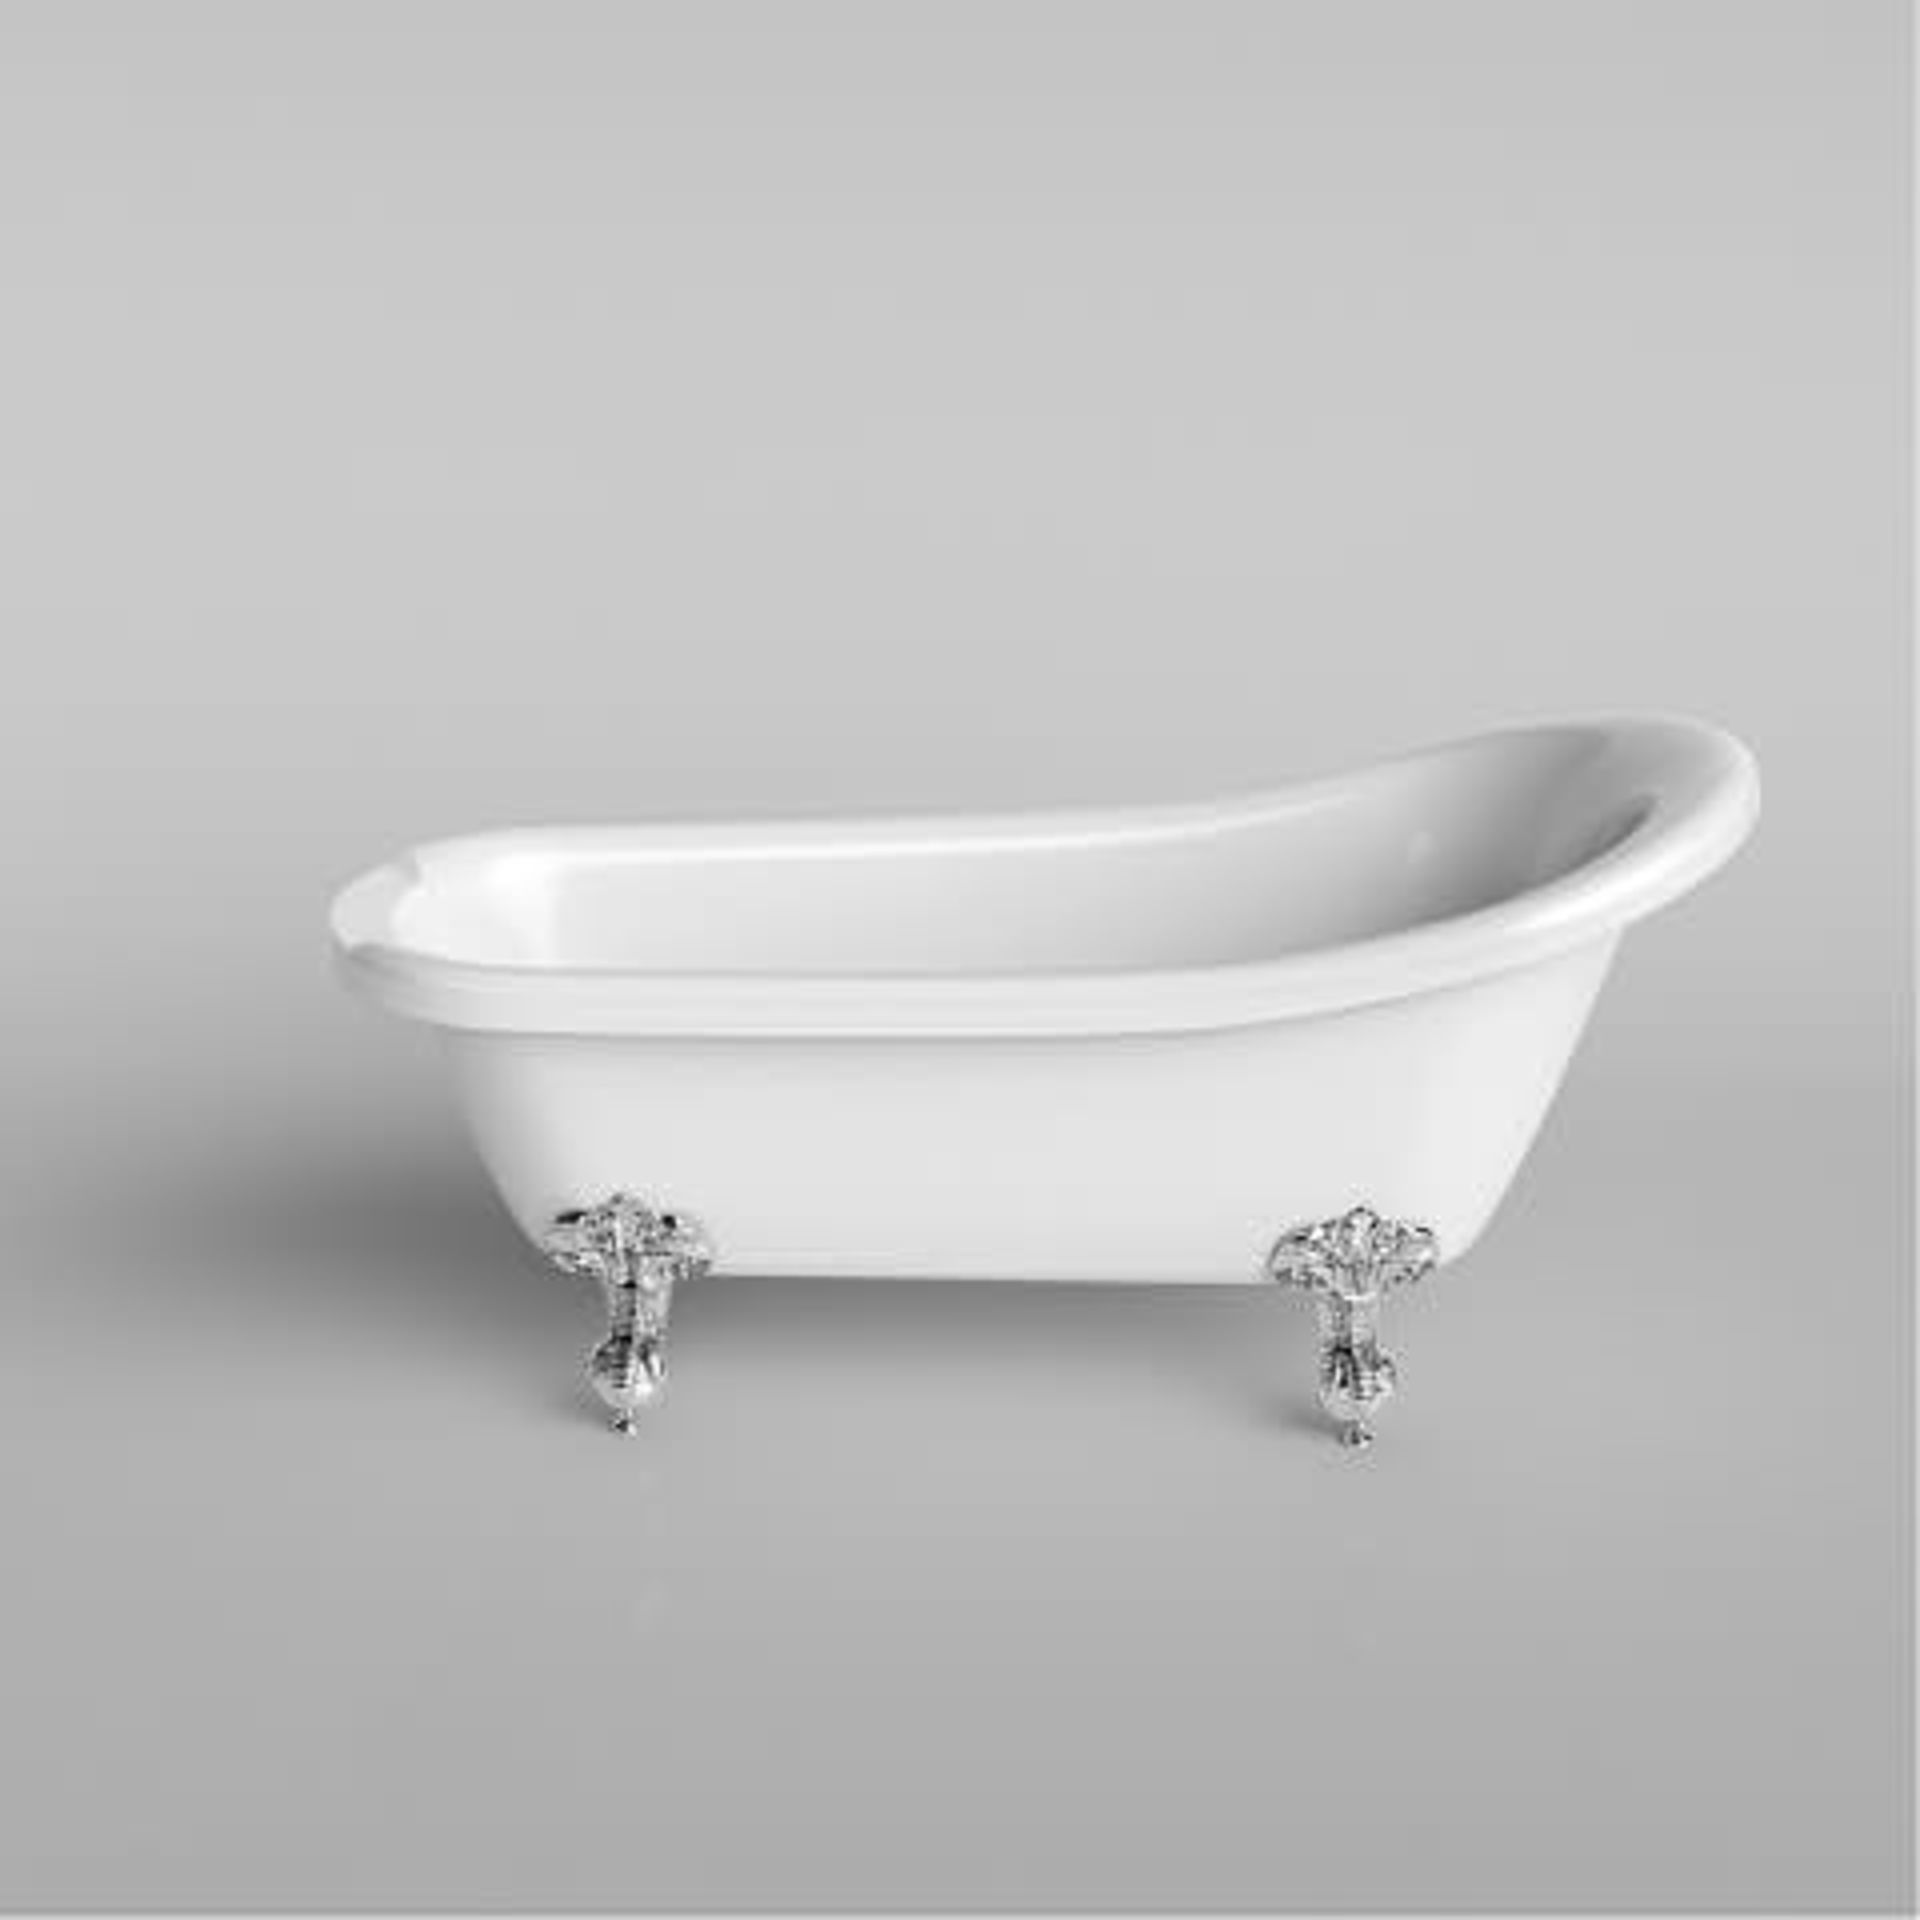 (H7) 1700mm Victoria Traditional Roll Top Slipper Bath - Ball Feet - Large. RRP £799.99. Create - Image 4 of 4